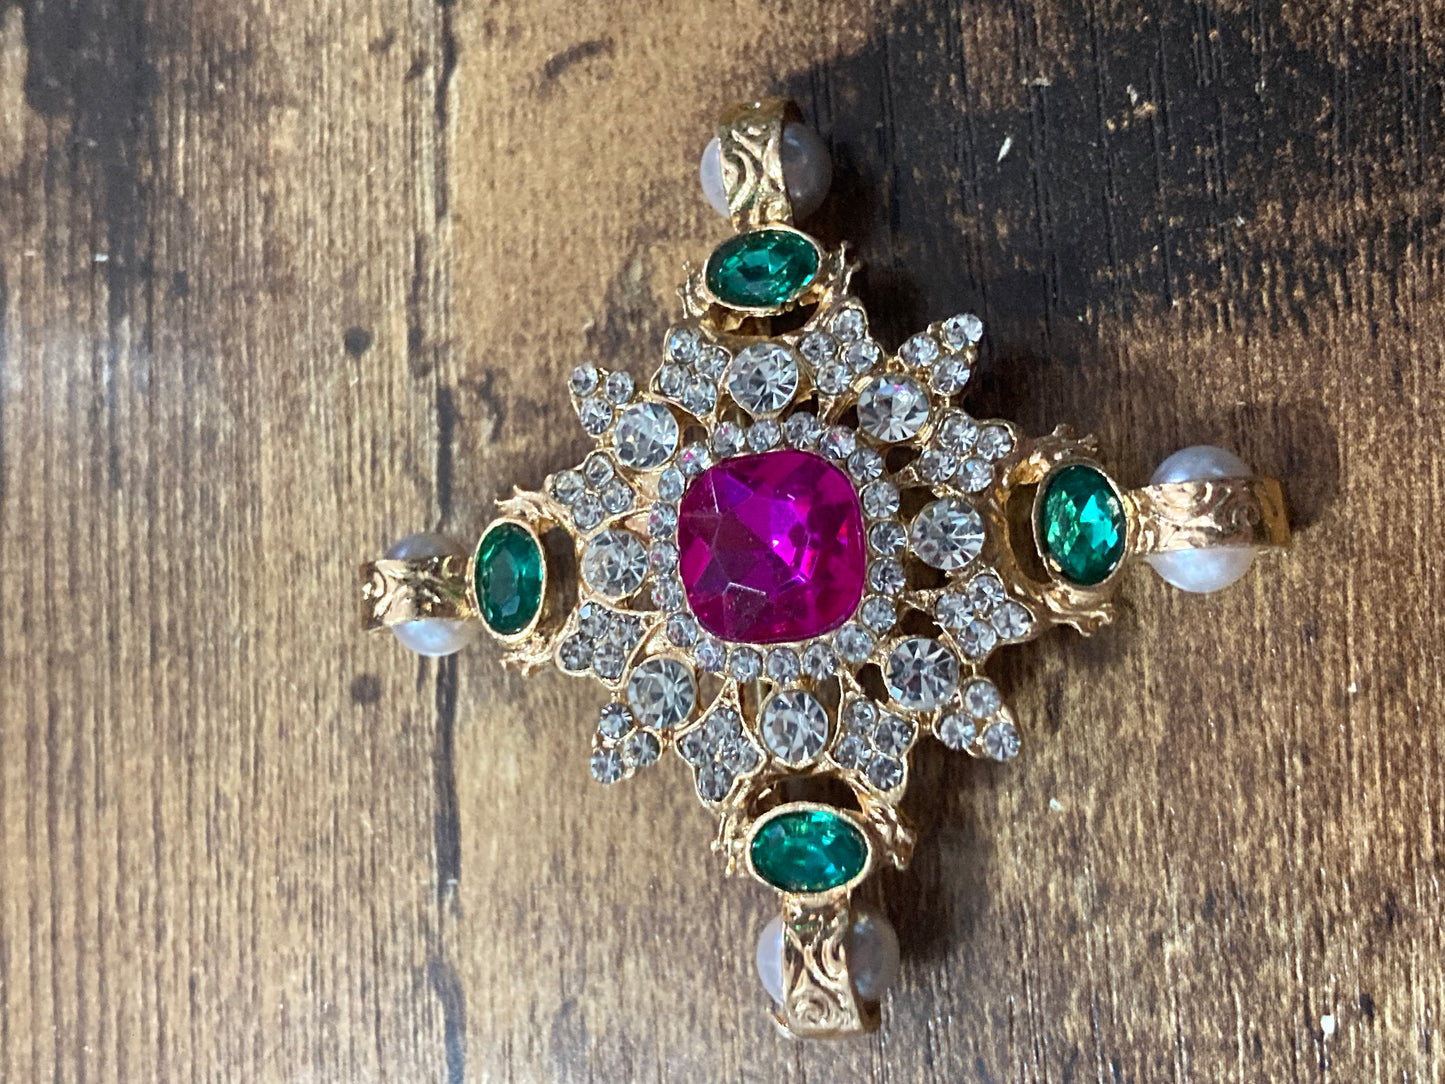 Pearl and Diamanté cross brooch with pink and emerald green stones